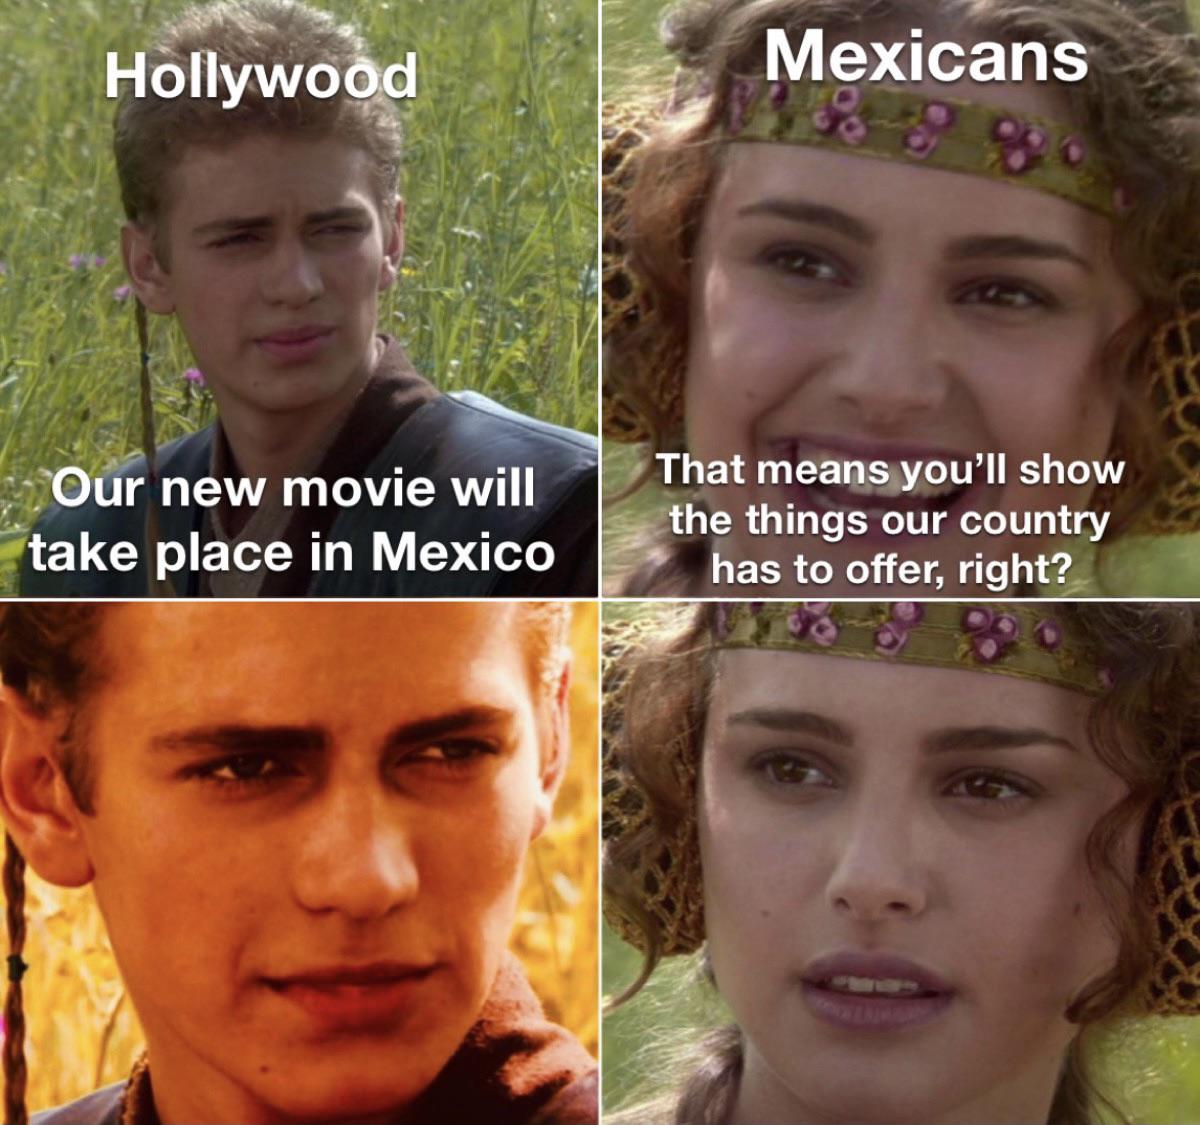 star wars natalie portman meme template - Hollywood Mexicans Our new movie will take place in Mexico That means you'll show the things our country has to offer, right?